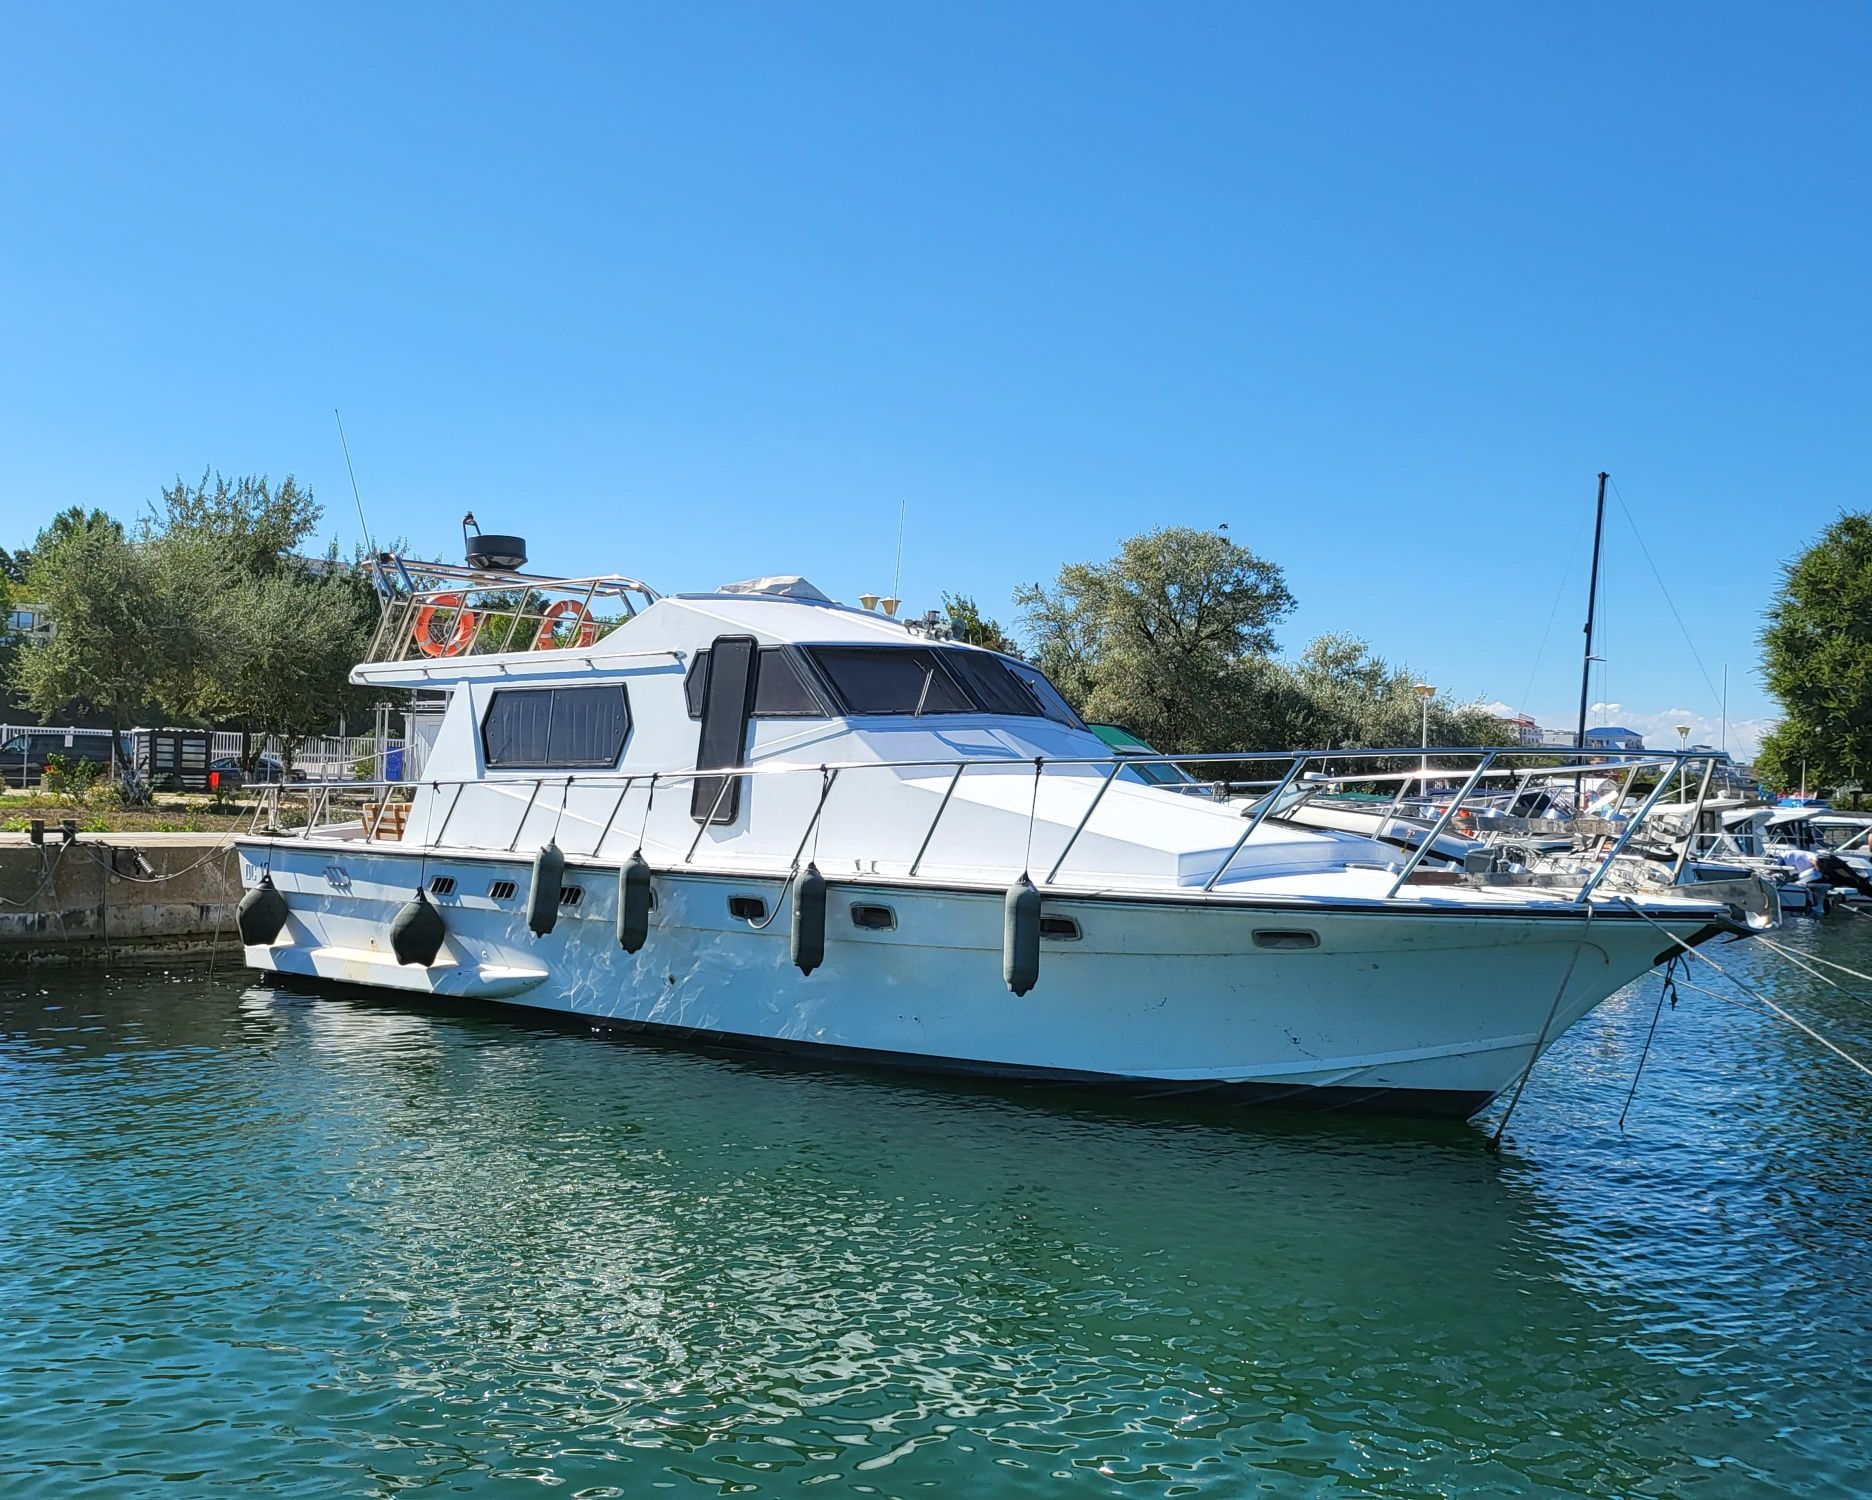 Vand MOTORYACHT, Lungime 16m, 10-16 persoane, este in Eforie Nord